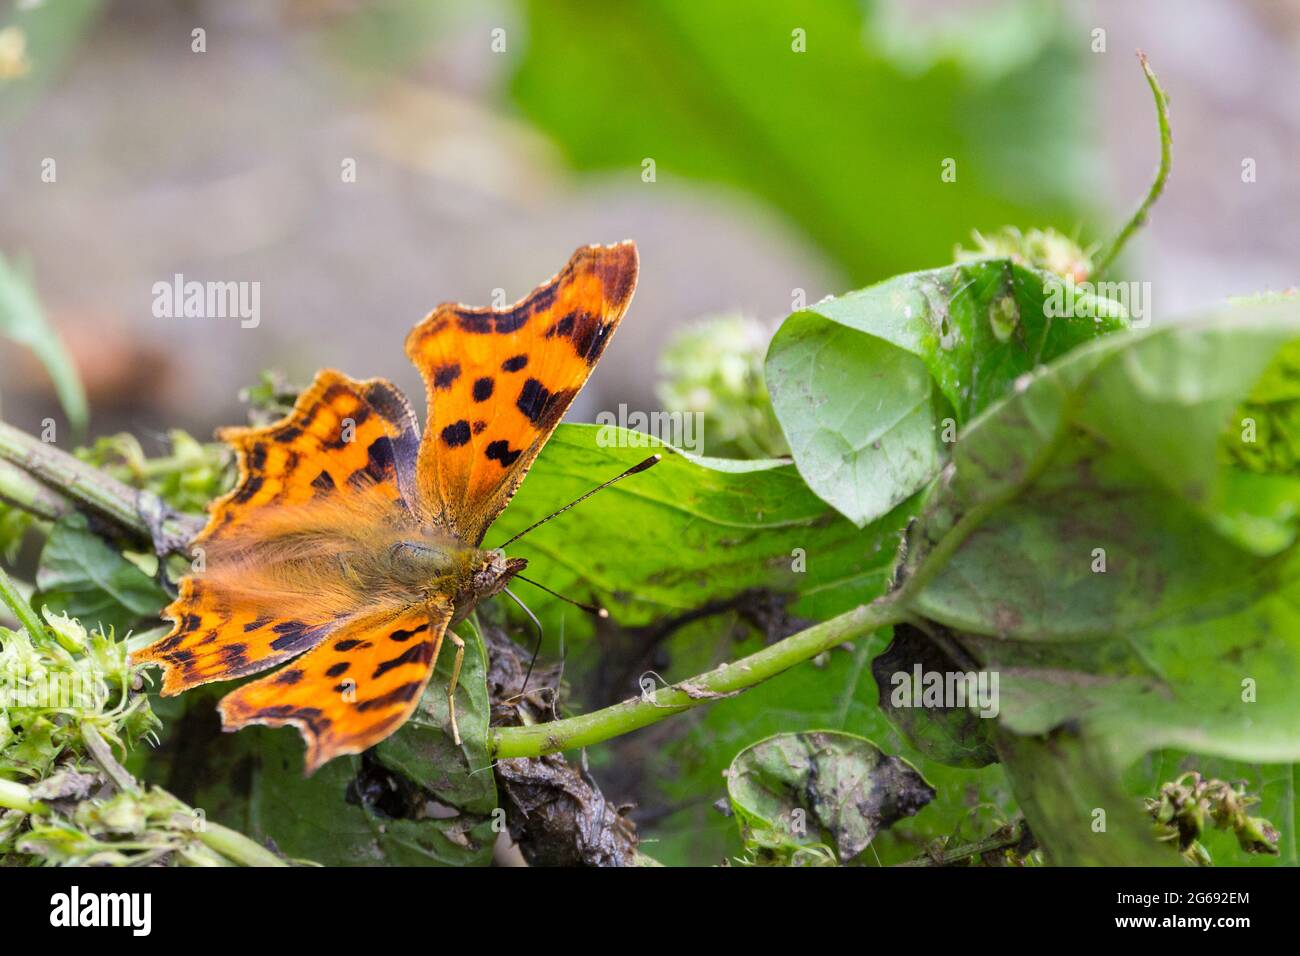 Comma butterfly (polygonia c-album) open ragged edged wings orange upper wing with dark markings smoky brown underwing with white comma shape marking Stock Photo